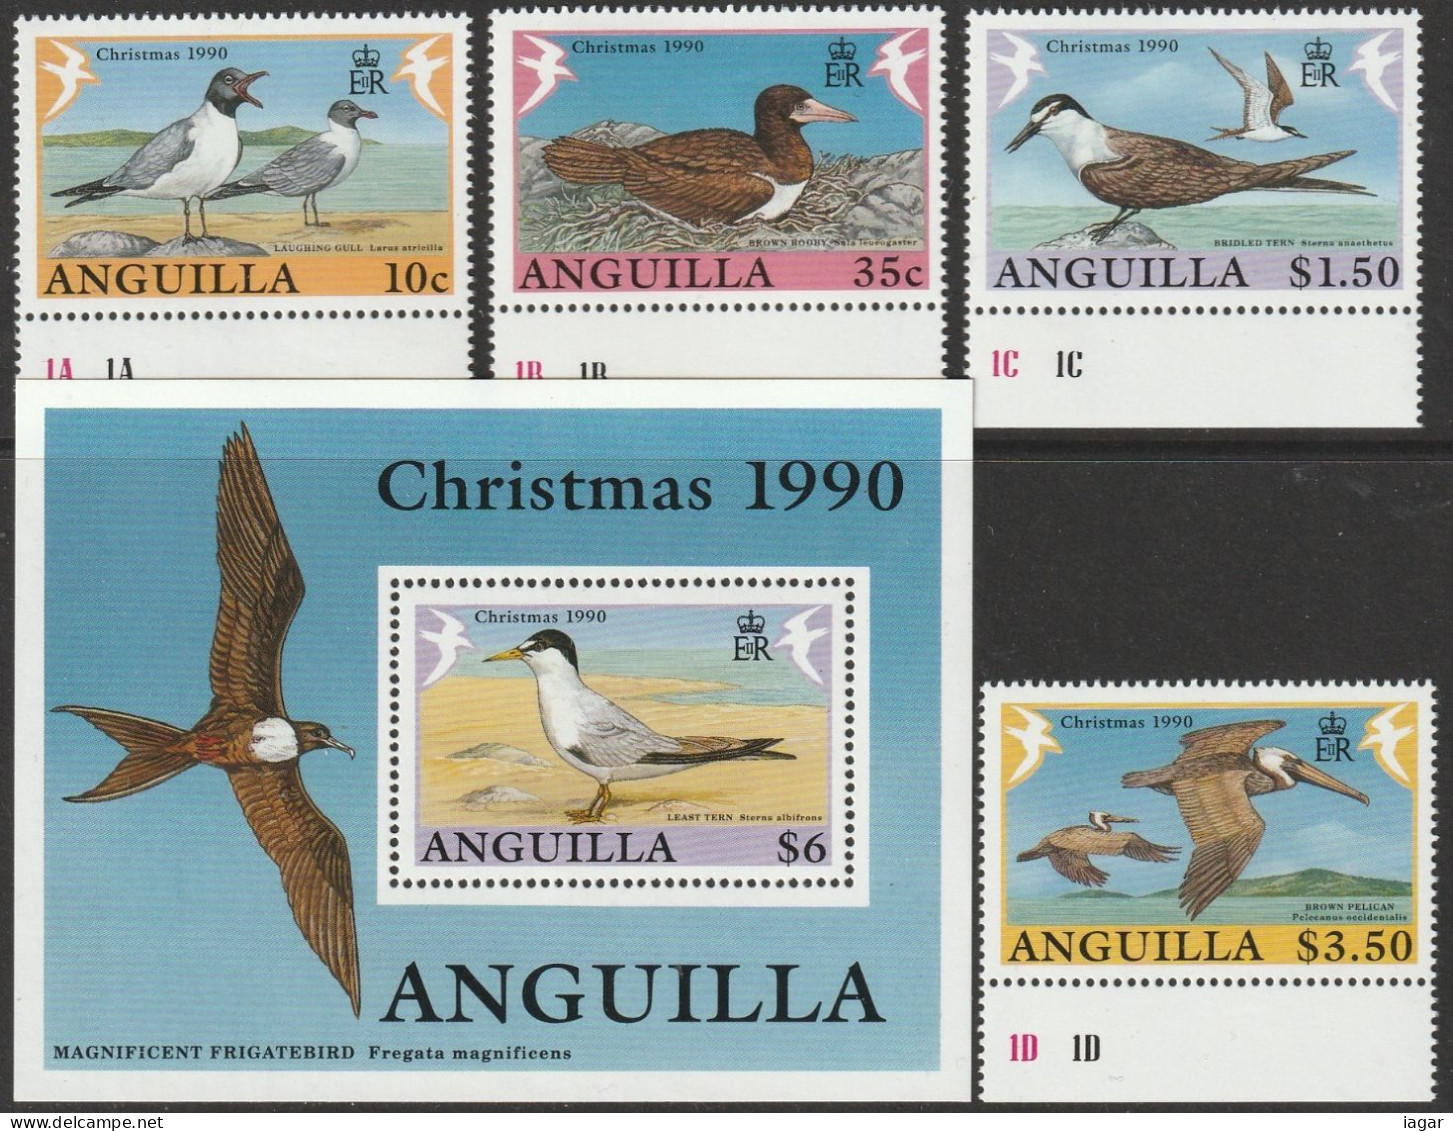 THEMATIC FAUNA:   SEA BIRDS. LAUGHING GULLS, BROWN BOOBY, BRIDLED TERN, BROWN PELICAN, LEAST TERN   - 4v+BF -   ANGUILLA - Marine Web-footed Birds